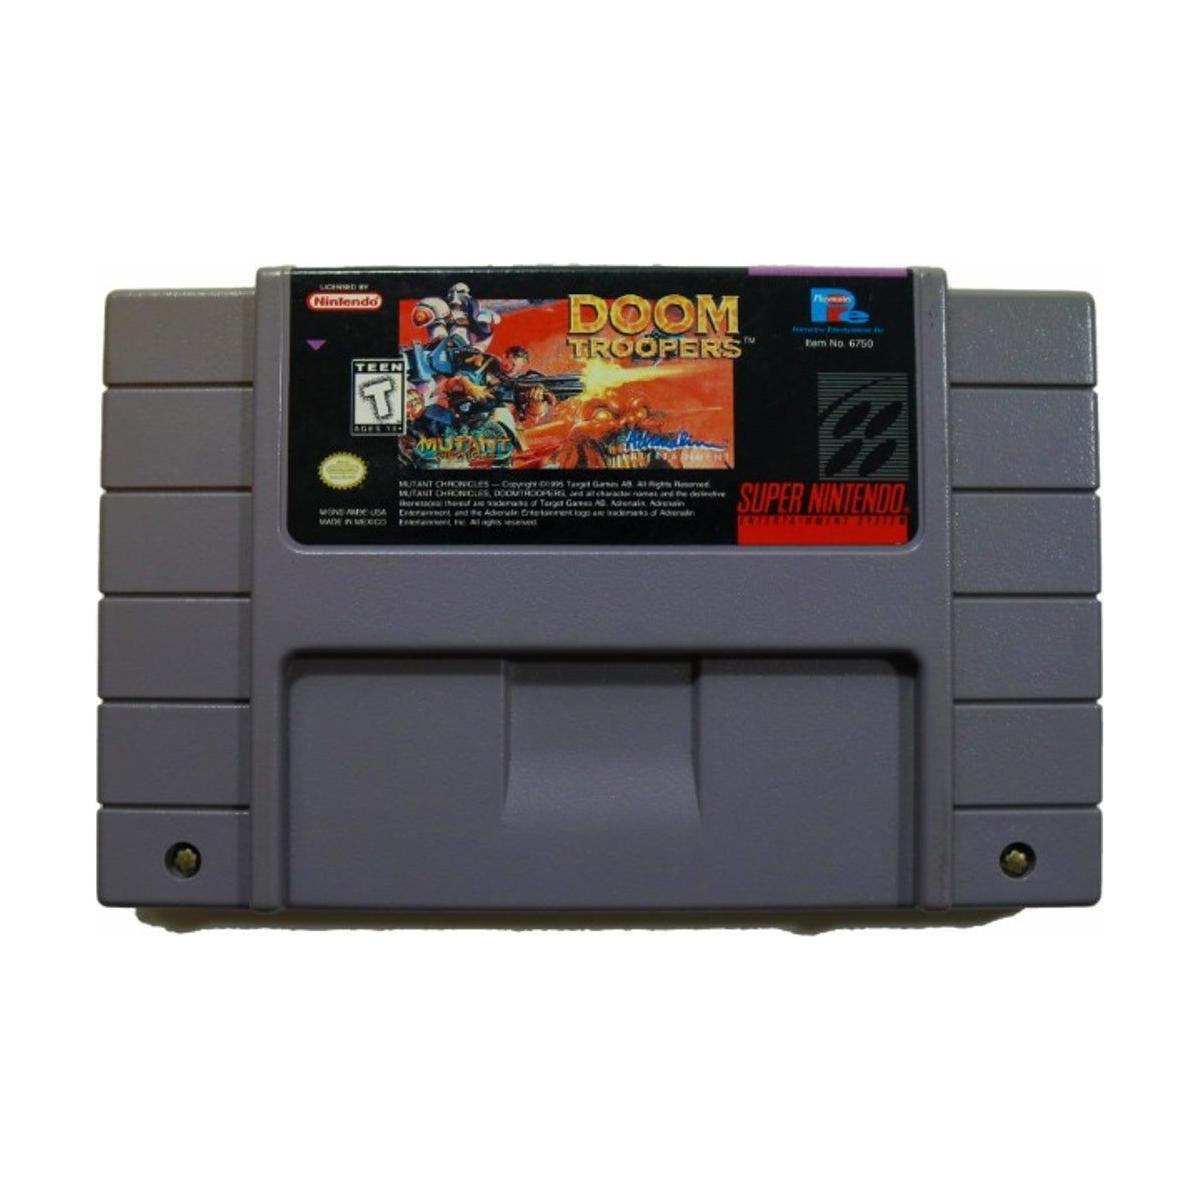 SNES - Doom Troopers Mutant Chronicles (Cartridge Only)